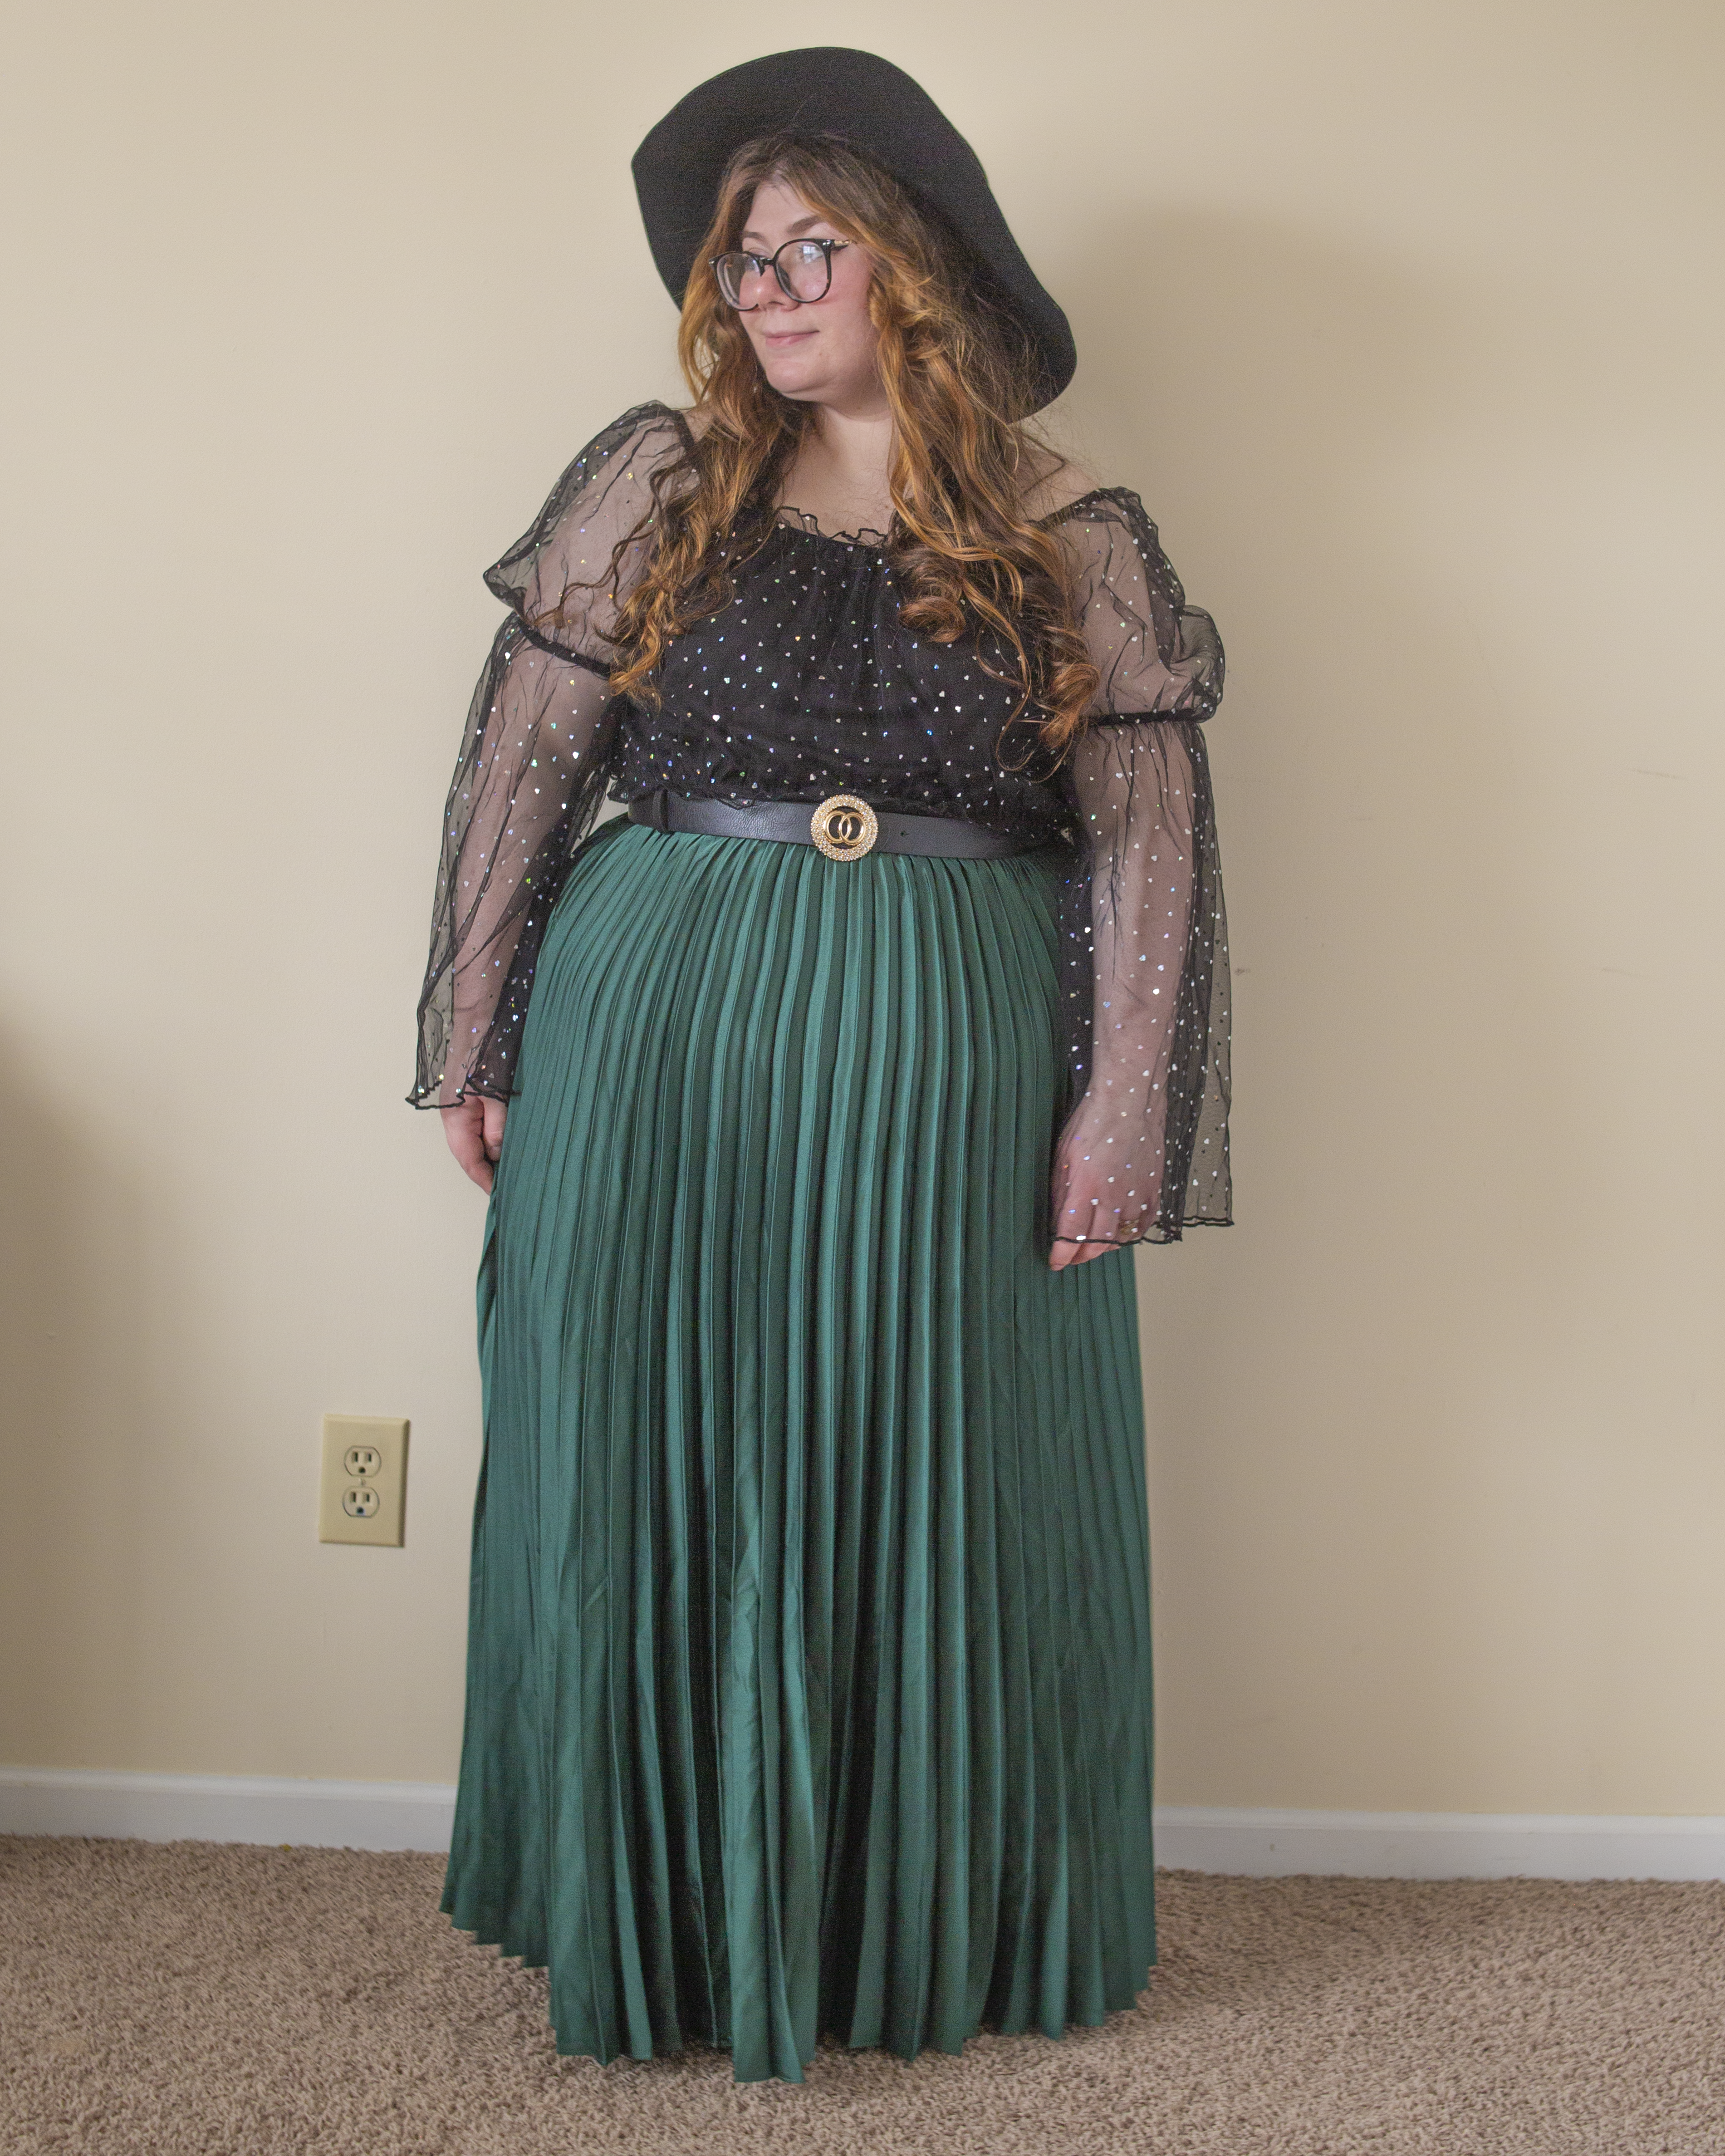 An outfit consisting of a black sheer blouse with bell sleeves and silver holographic heart print, tucked into a green pleated maxi skirt and black ankle boots.